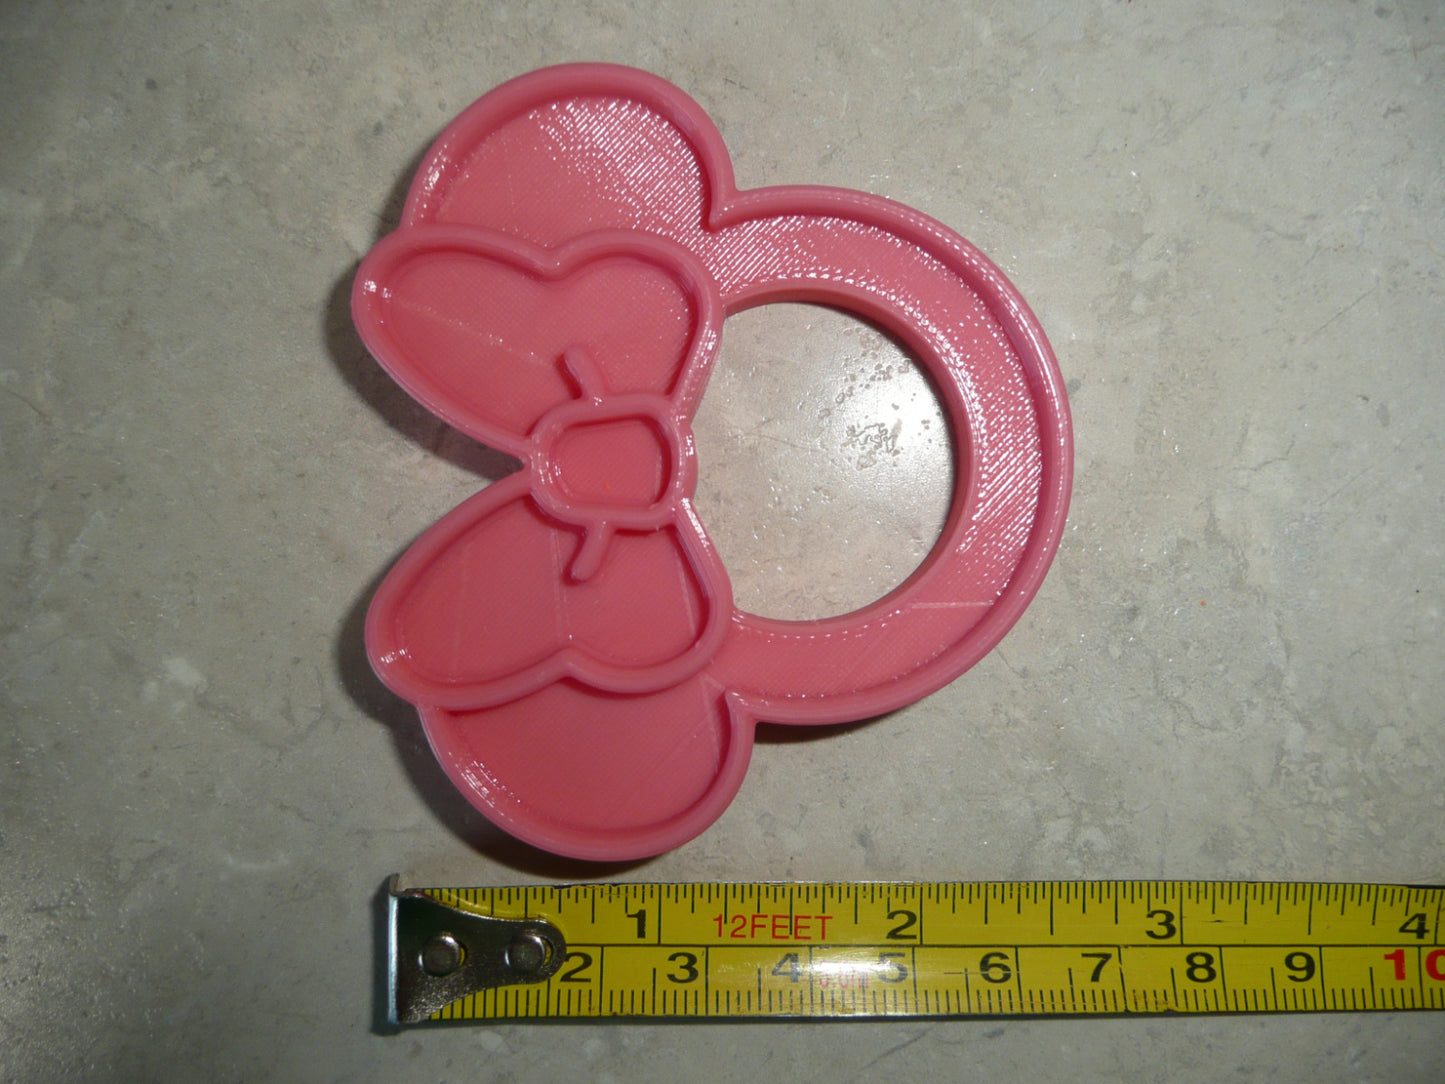 Minnie Mouse Themed Pink Napkin Ring Holders Set Of 4 Made In USA PR4810